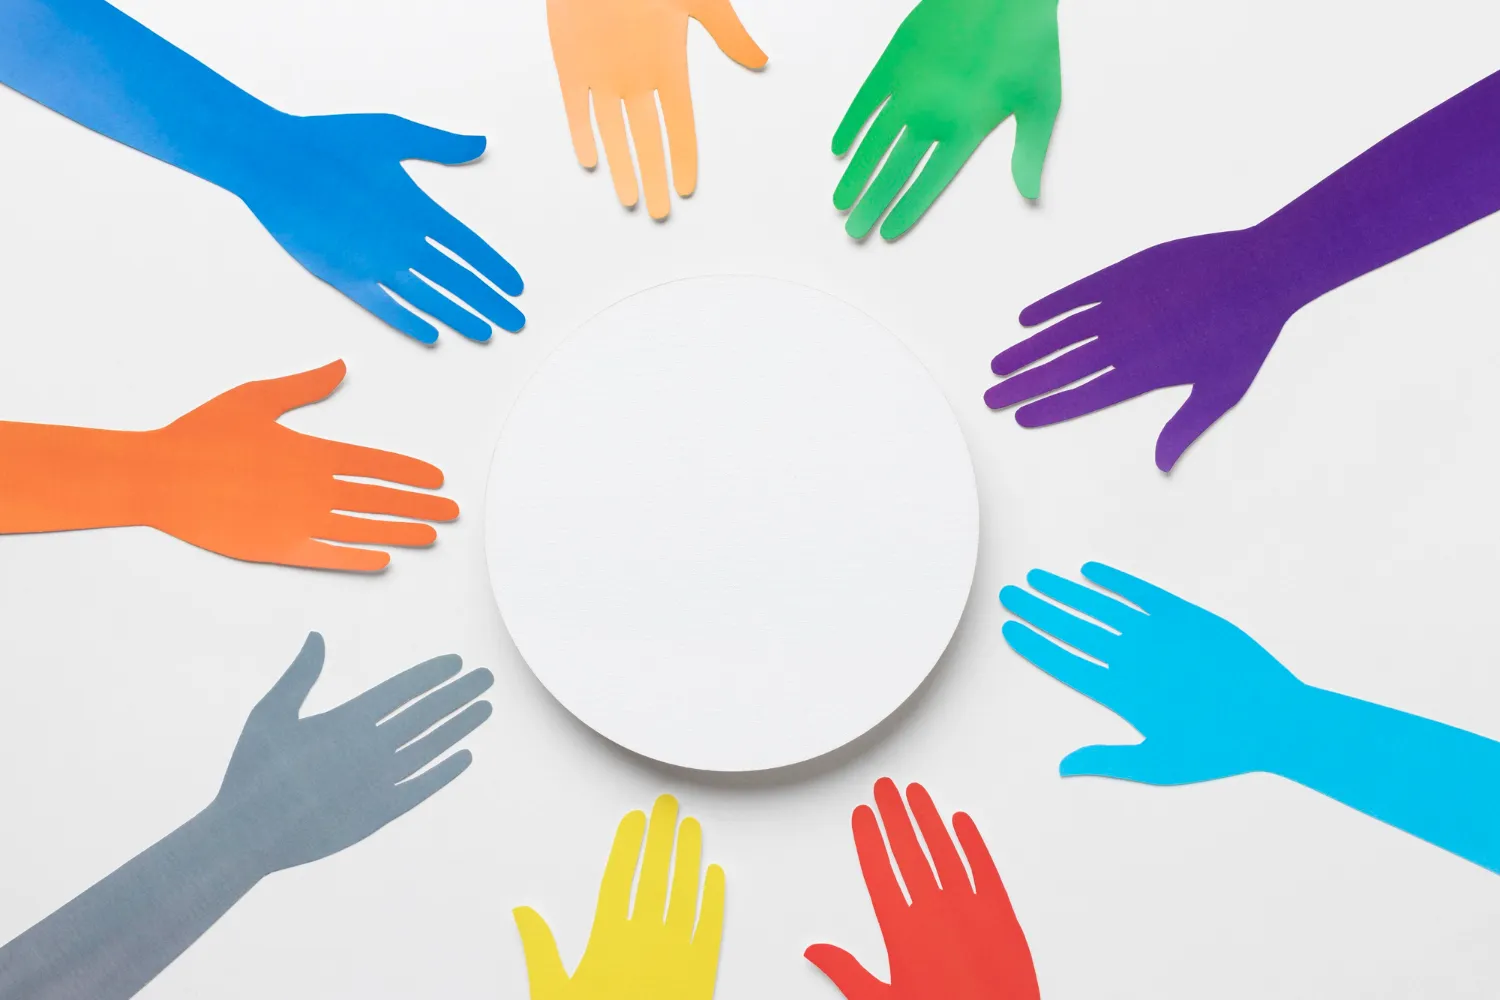 Colorful paper hands in blue, green, orange, red, yellow, and purple extend towards a white circle, representing the diverse elements of a psychological contract in the workplace, as discussed by JOH Partners.